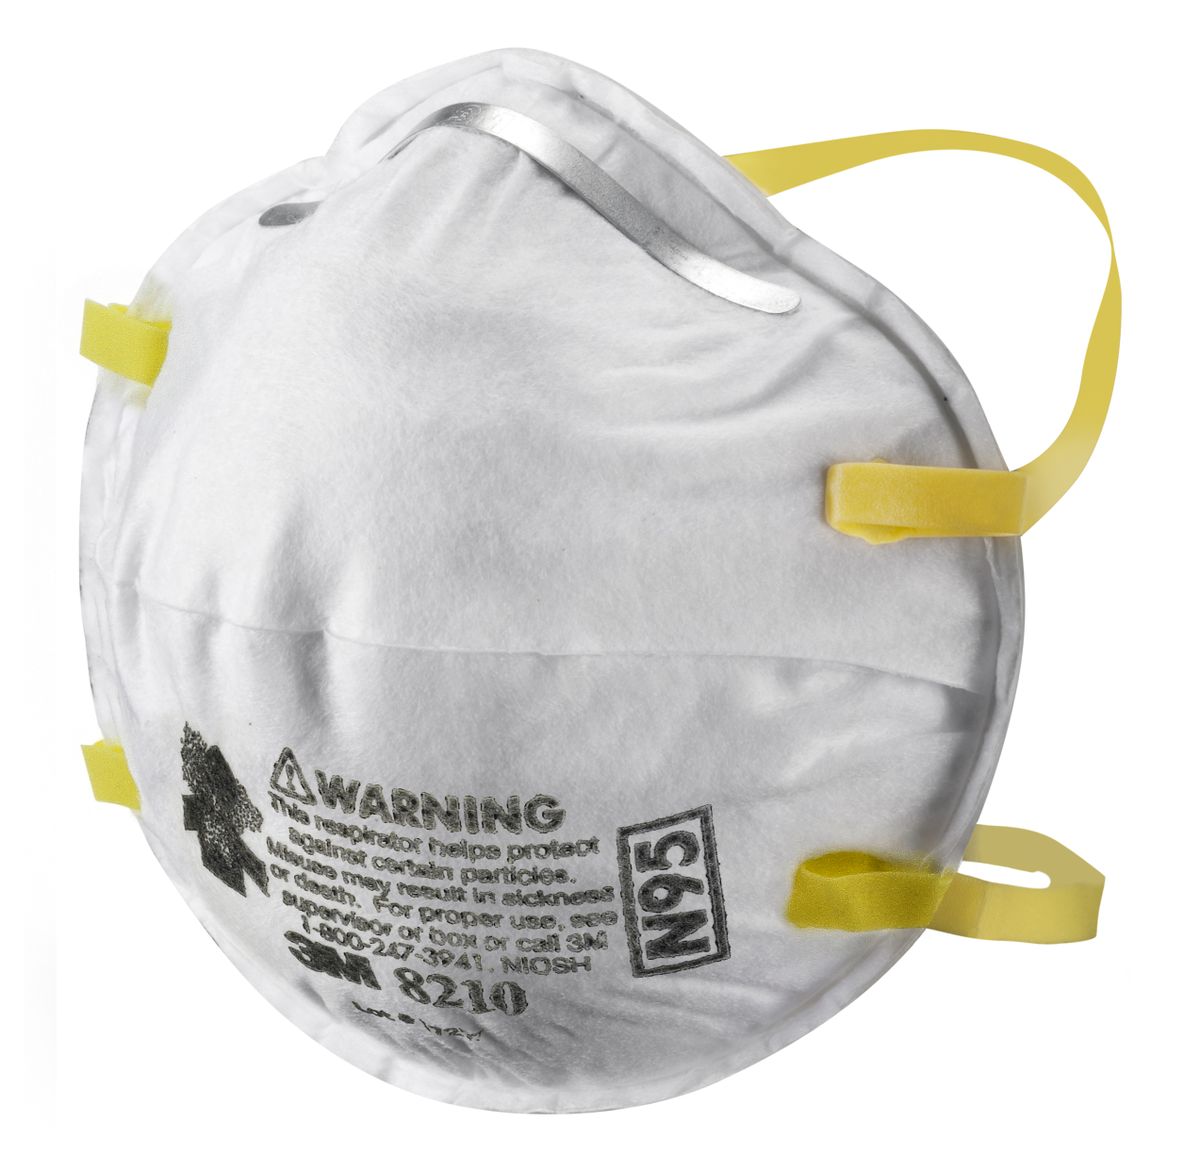 When wearing a respirator mask, the mask must fit snug against the face, touching skin all the way around.  (Tim Wheeler)